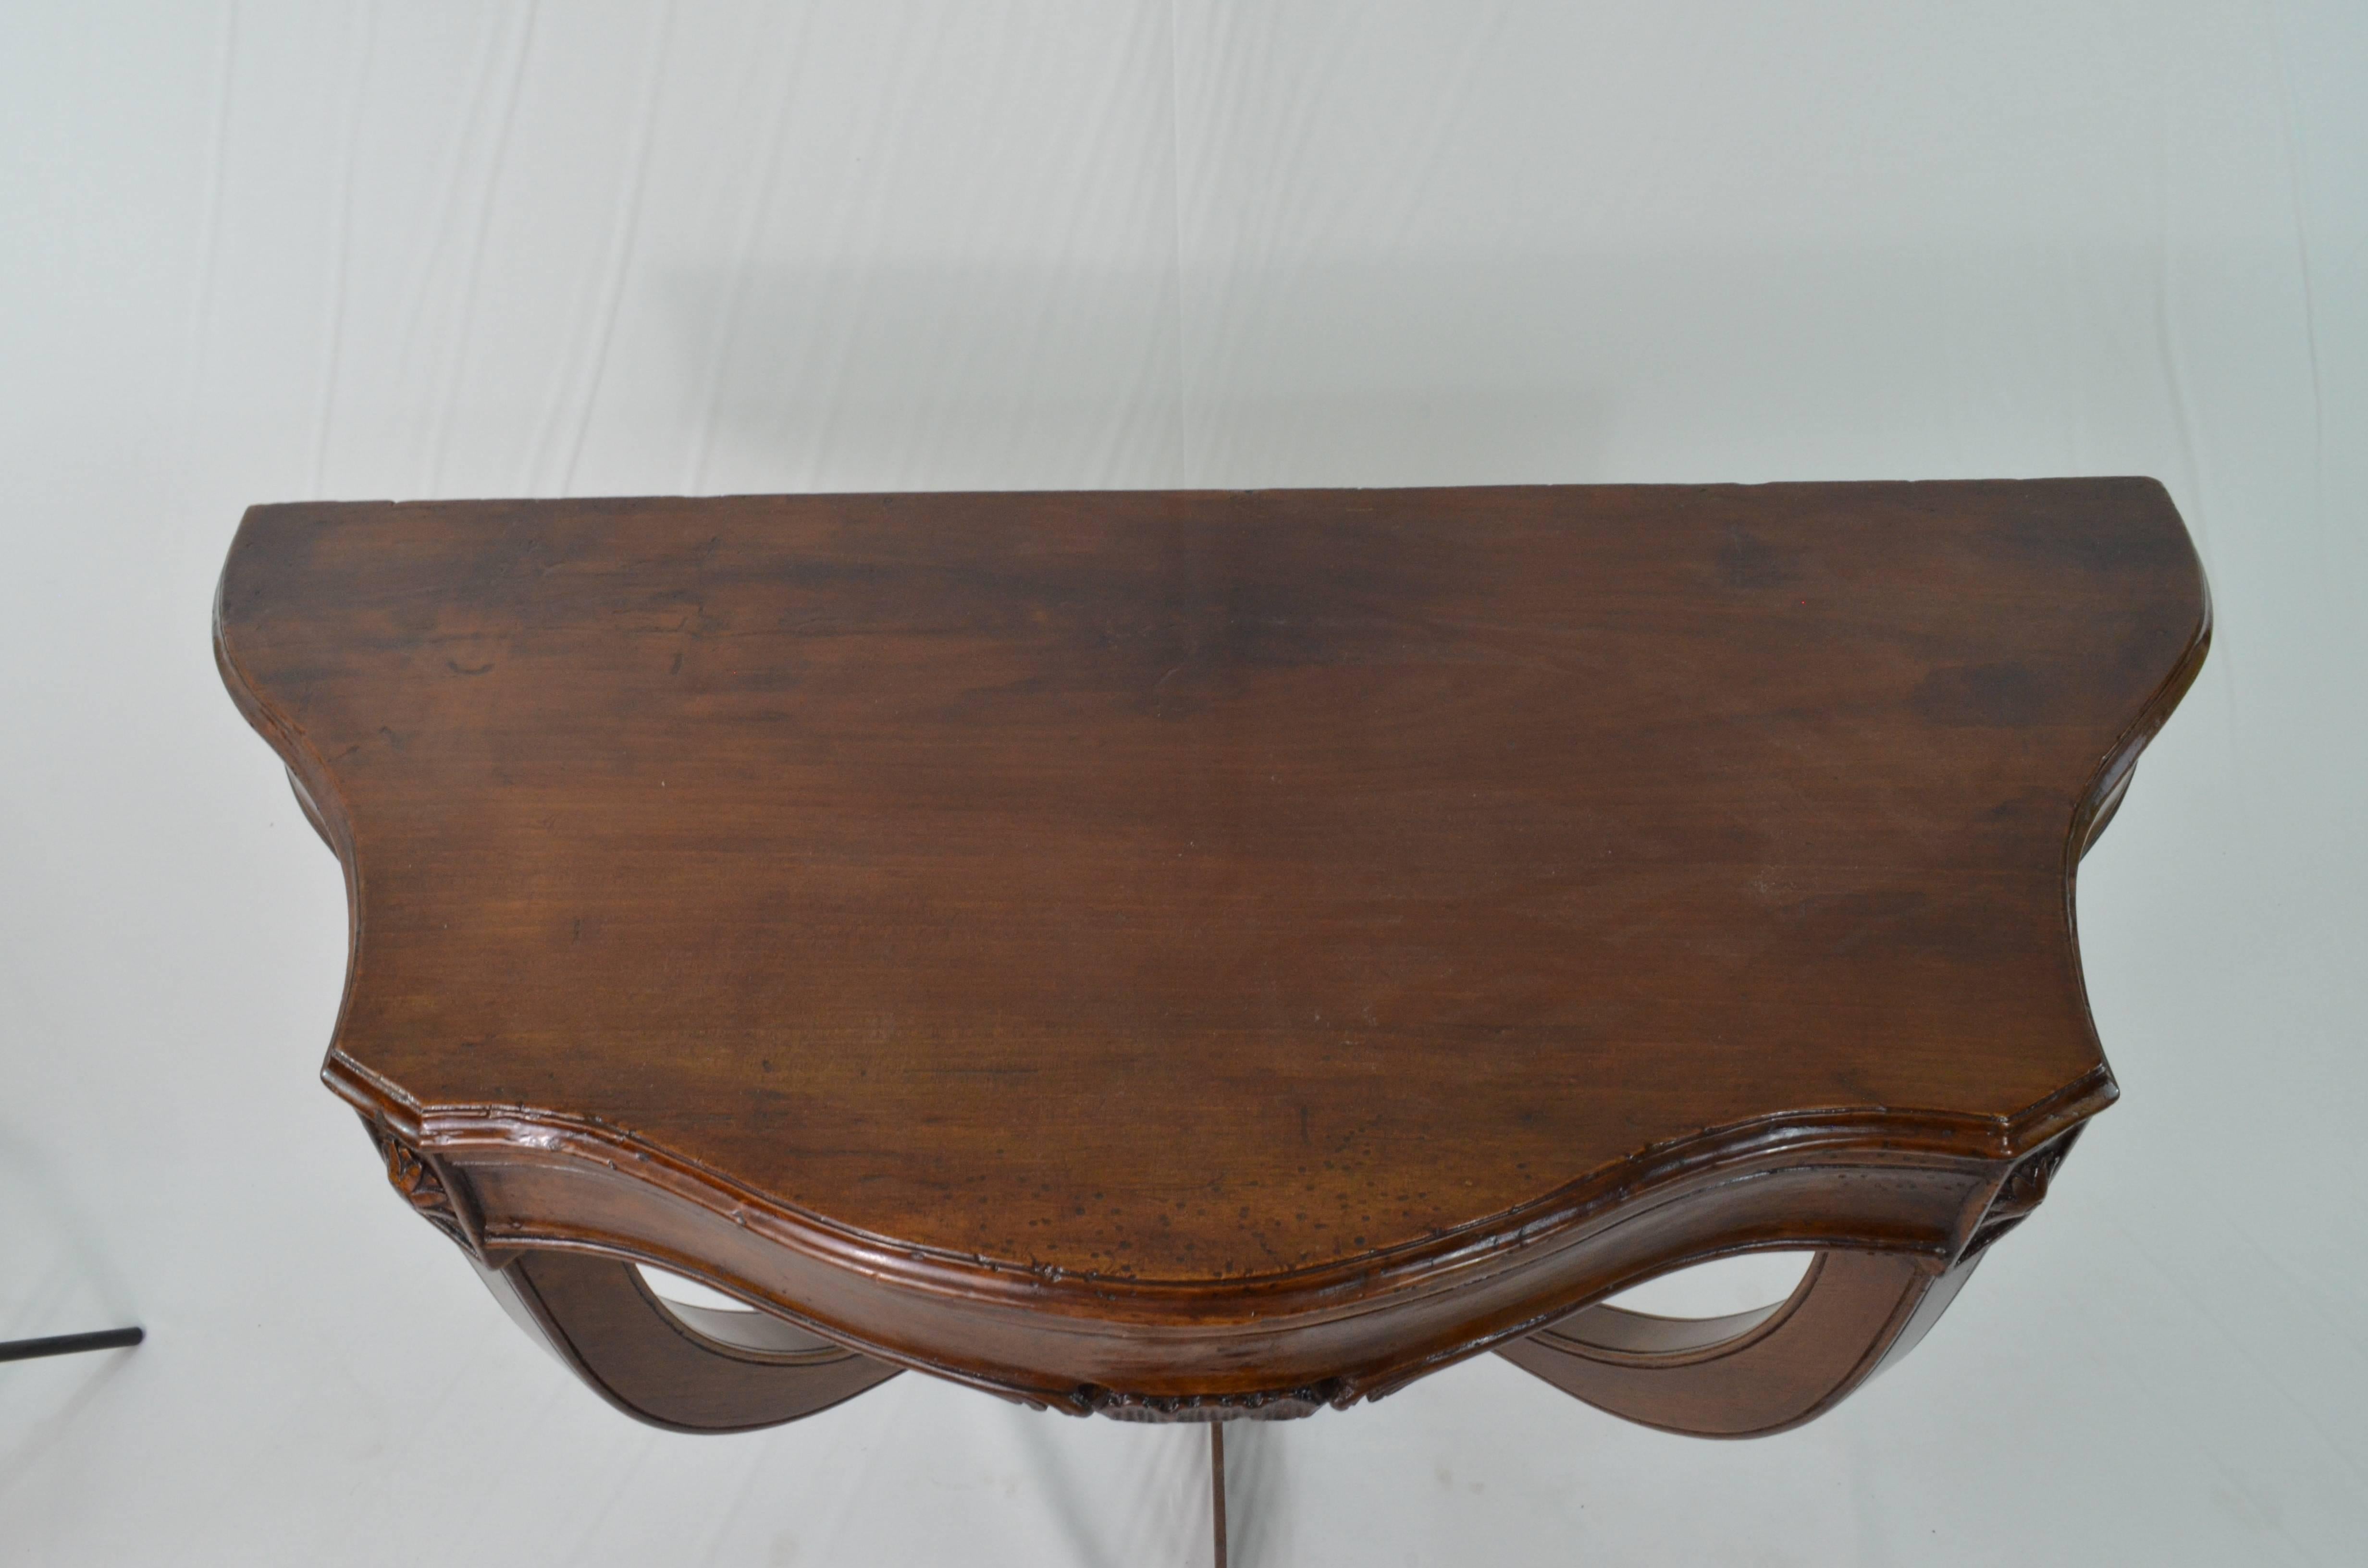 Walnut wood console tables to be hanged, from Italy (Veneto Region because of the typical engravings flower shaped detail). Period Louis XV, 18th century. They are in perfect conditions and underwent only a normal conservative restoration (waxing